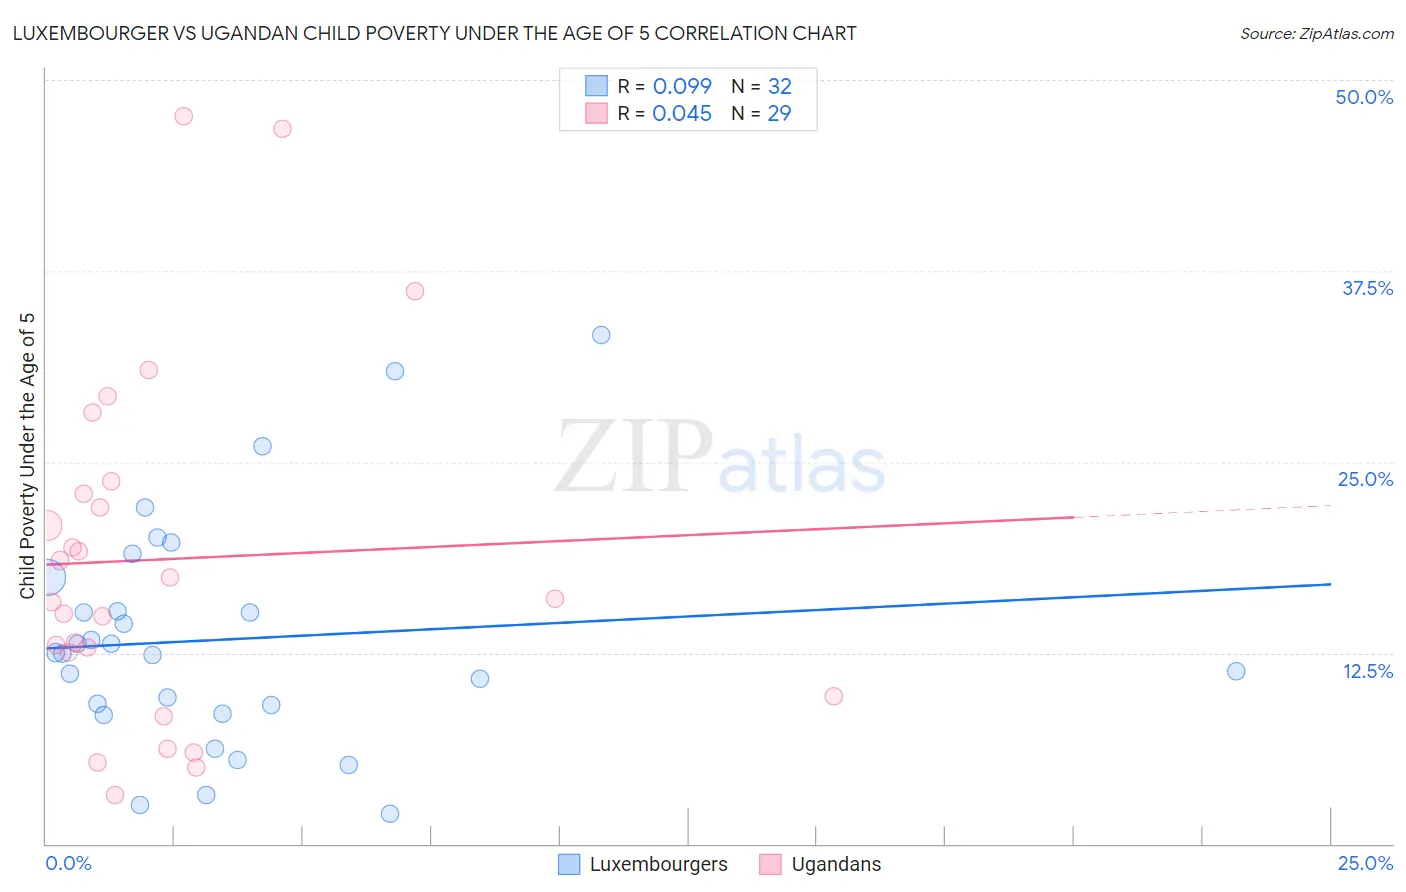 Luxembourger vs Ugandan Child Poverty Under the Age of 5